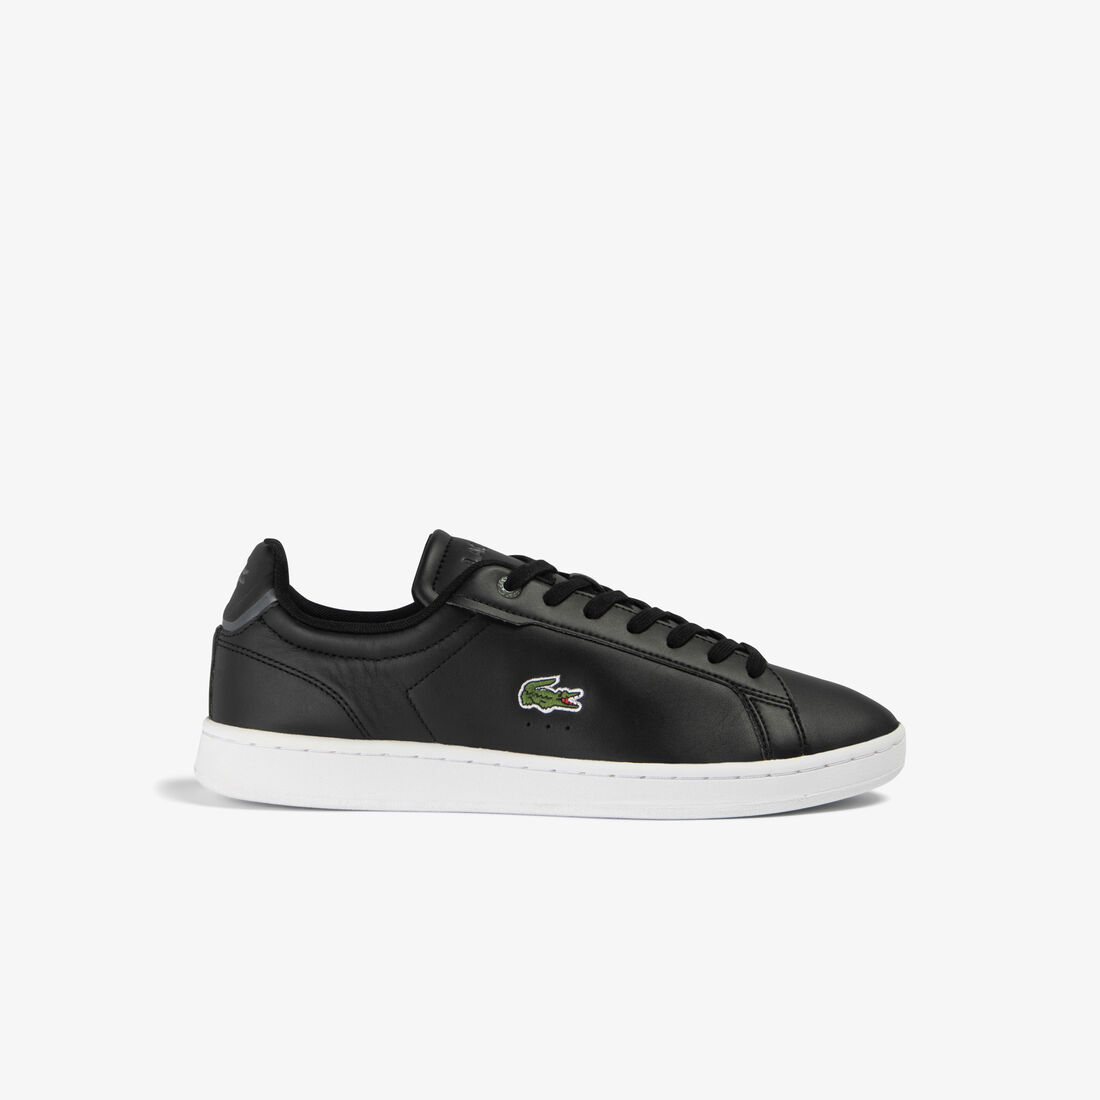 Men's Lacoste Carnaby Pro BL Leather Tonal Trainers - 45SMA0110-312